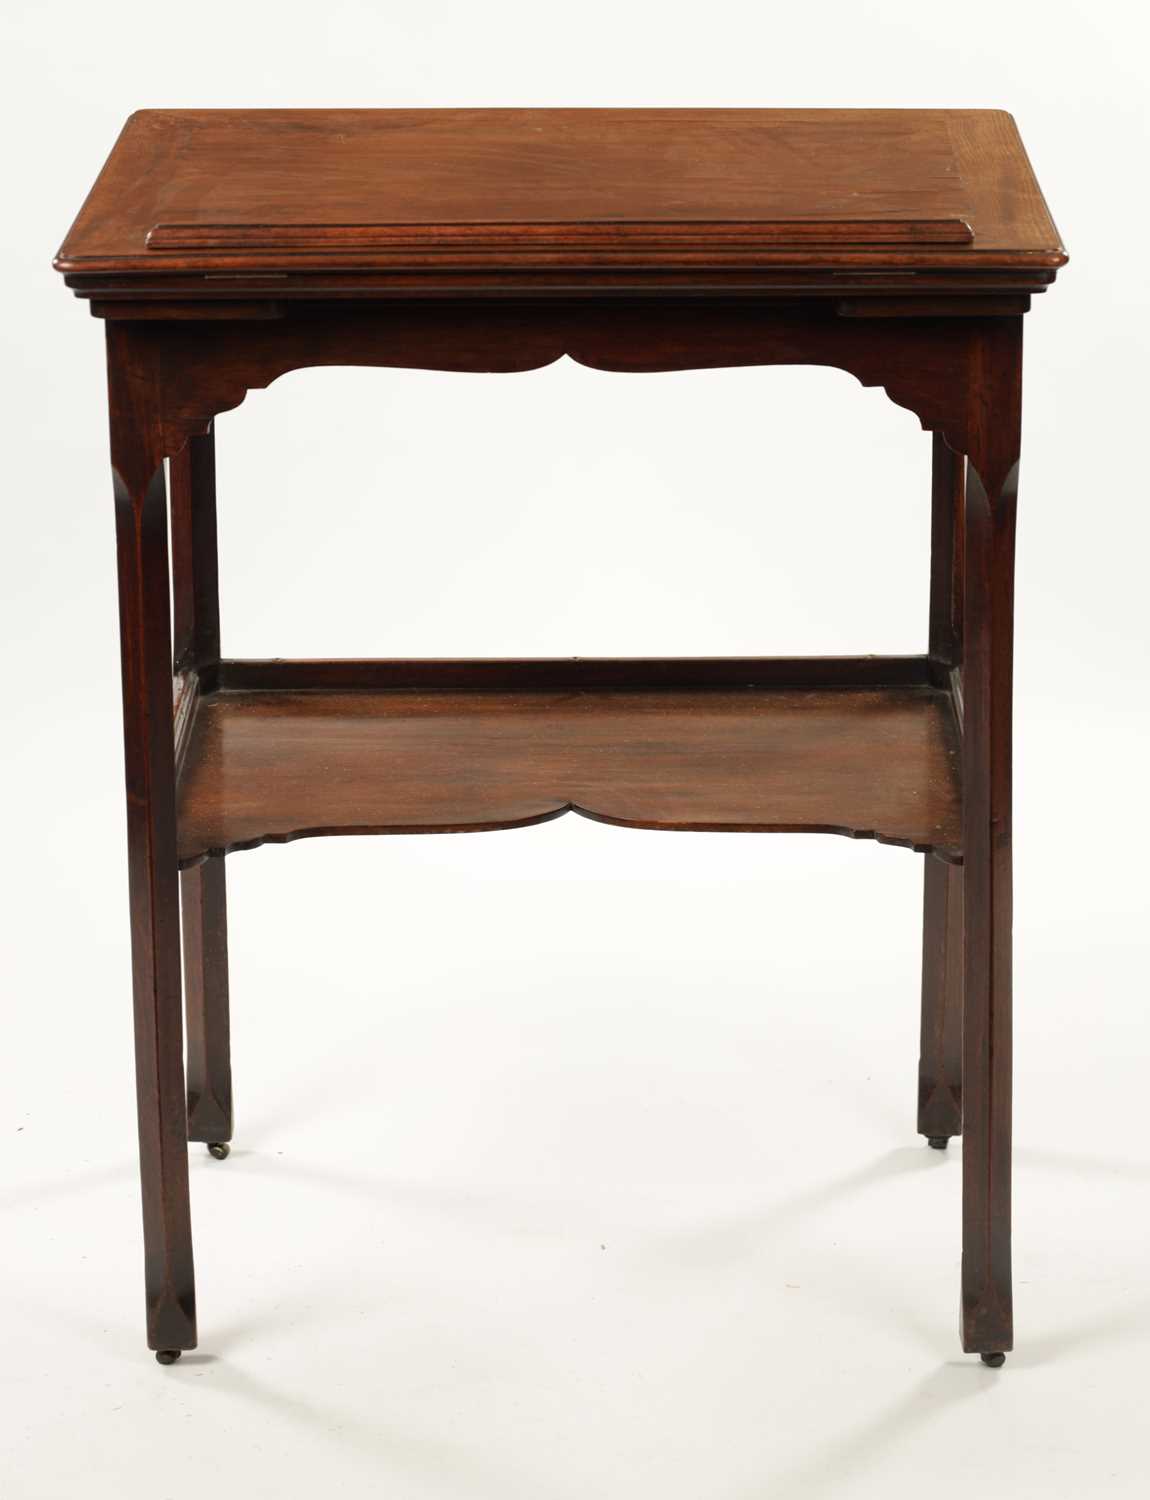 A RARE AND UNUSUAL GEORGE II MAHOGANY ARTIST’S TABLE IN THE MANNER OF THOMAS CHIPPENDALE - Image 11 of 14